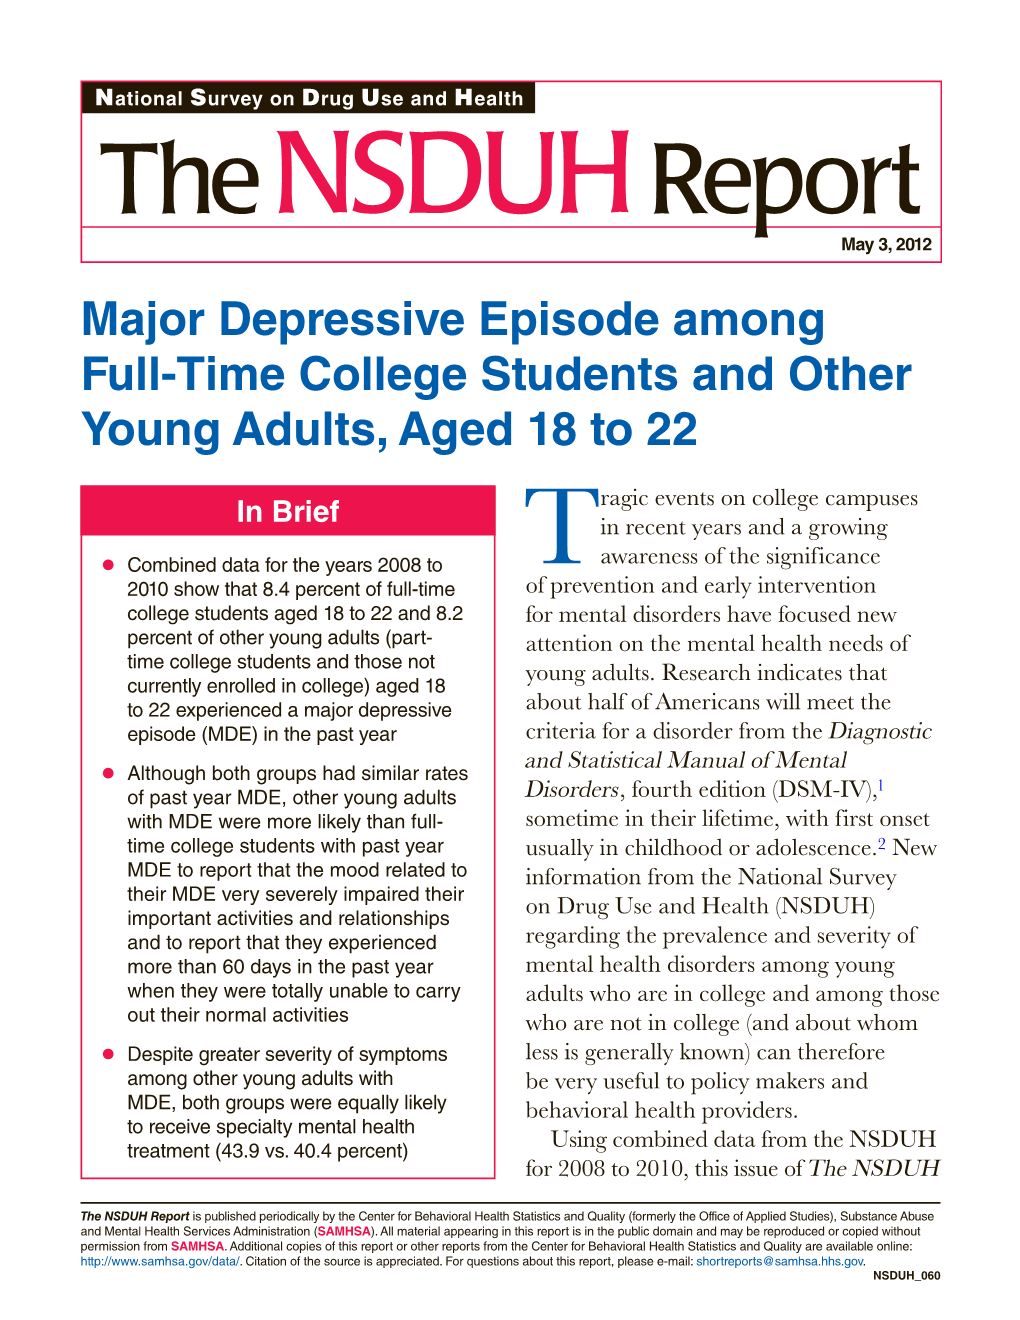 Major Depressive Episode Among Full-Time College Students and Other Young Adults, Aged 18 to 22